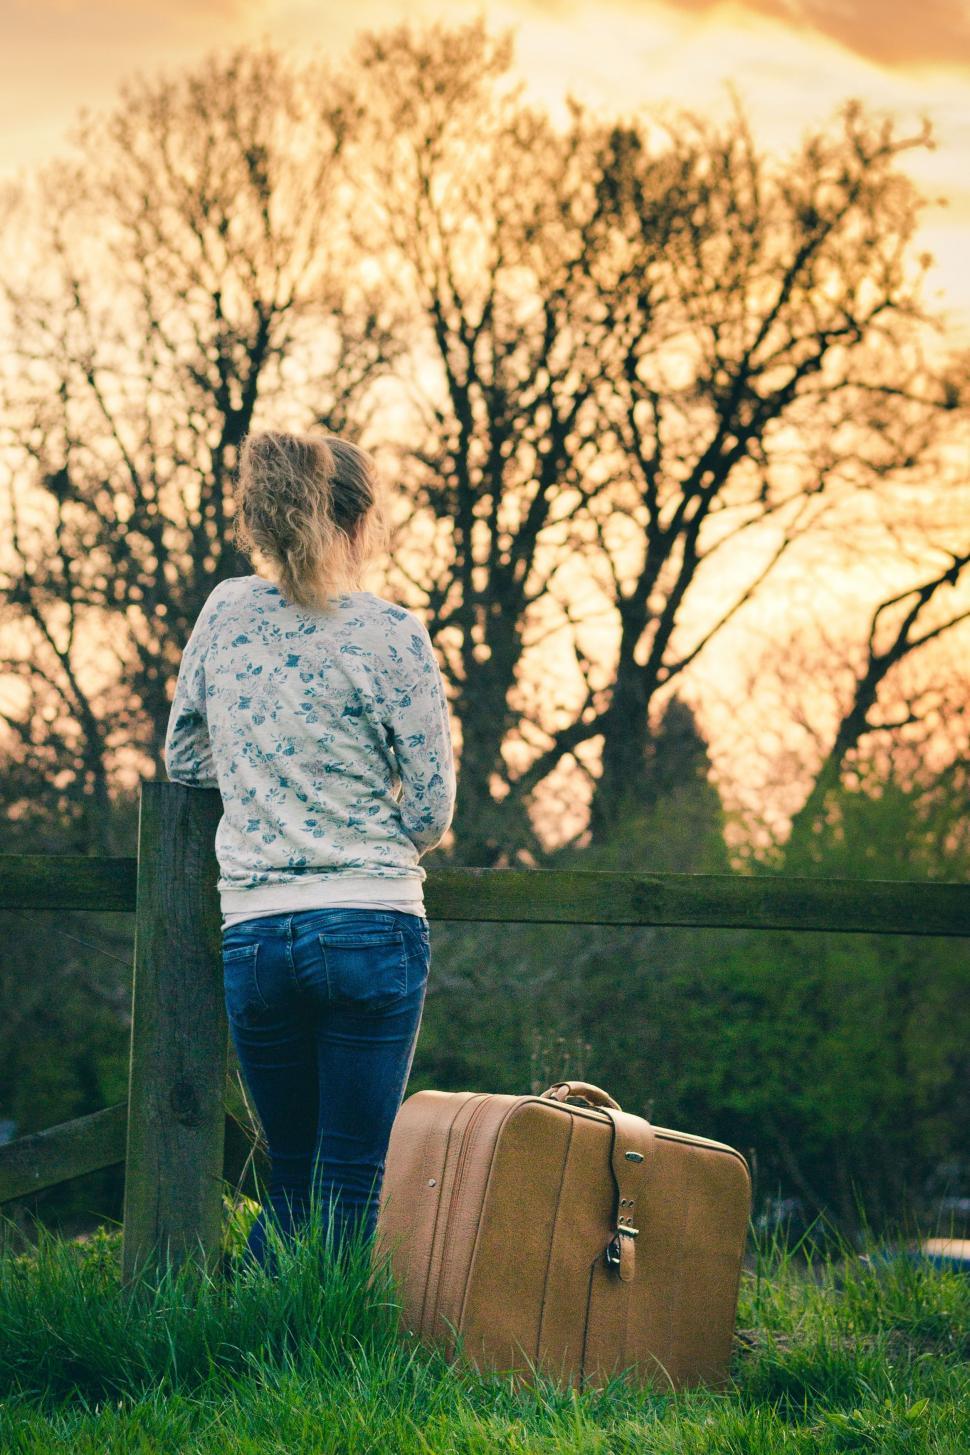 Free Image of Woman Standing Next to Fence With Suitcase 